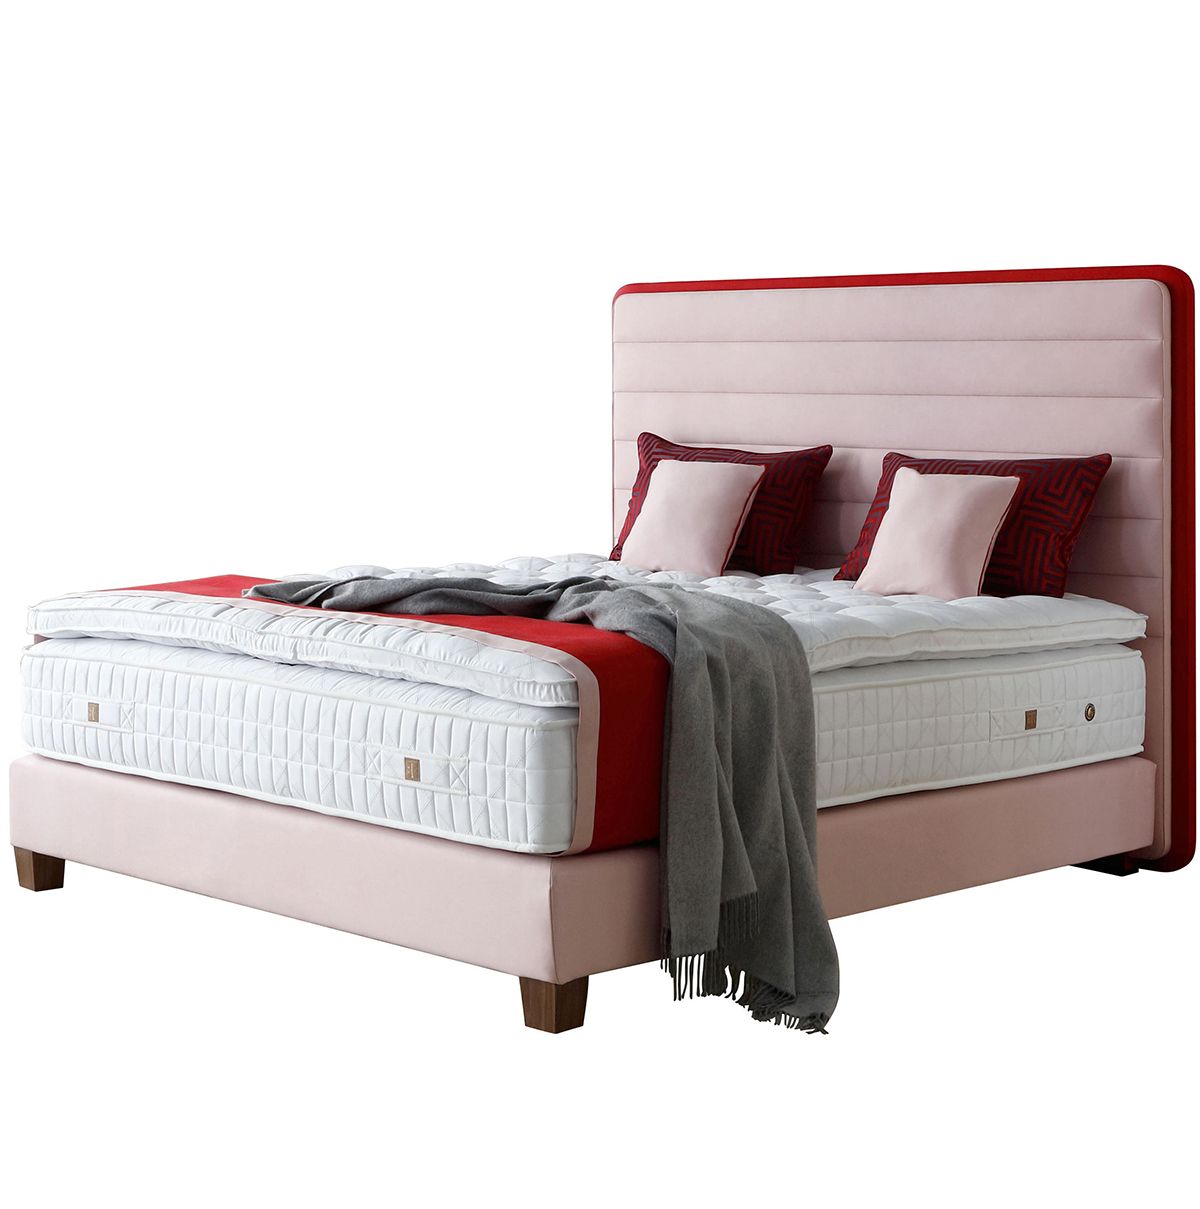 Double bed 160x200 cm pink Lounge Headboard